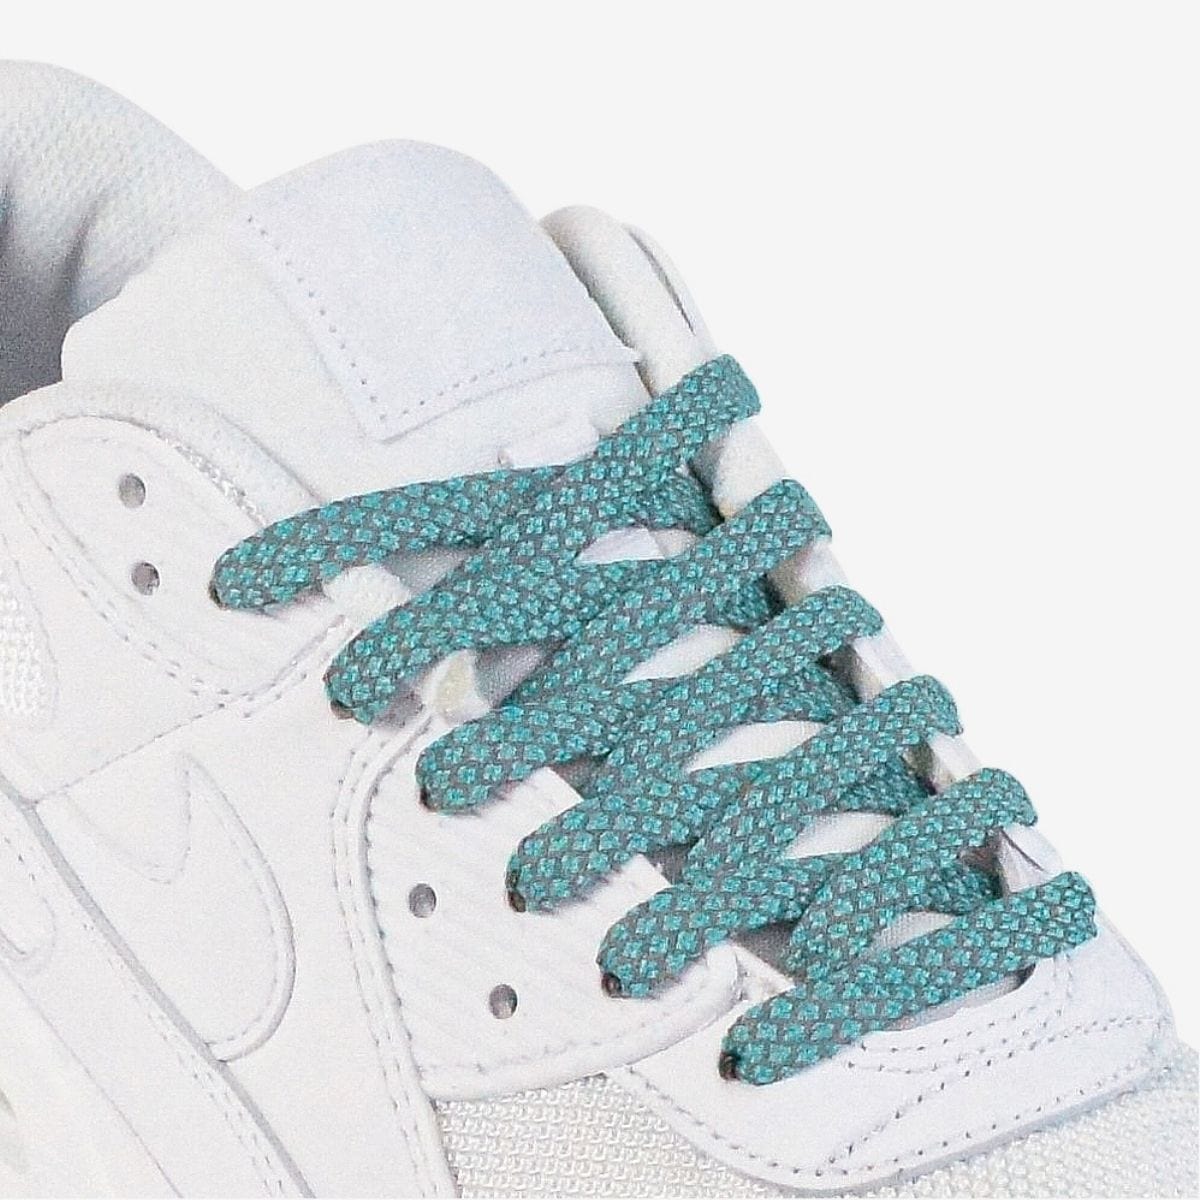 reflective-flat-shoelaces-in-turquoise-suitable-for-popular-sneakers